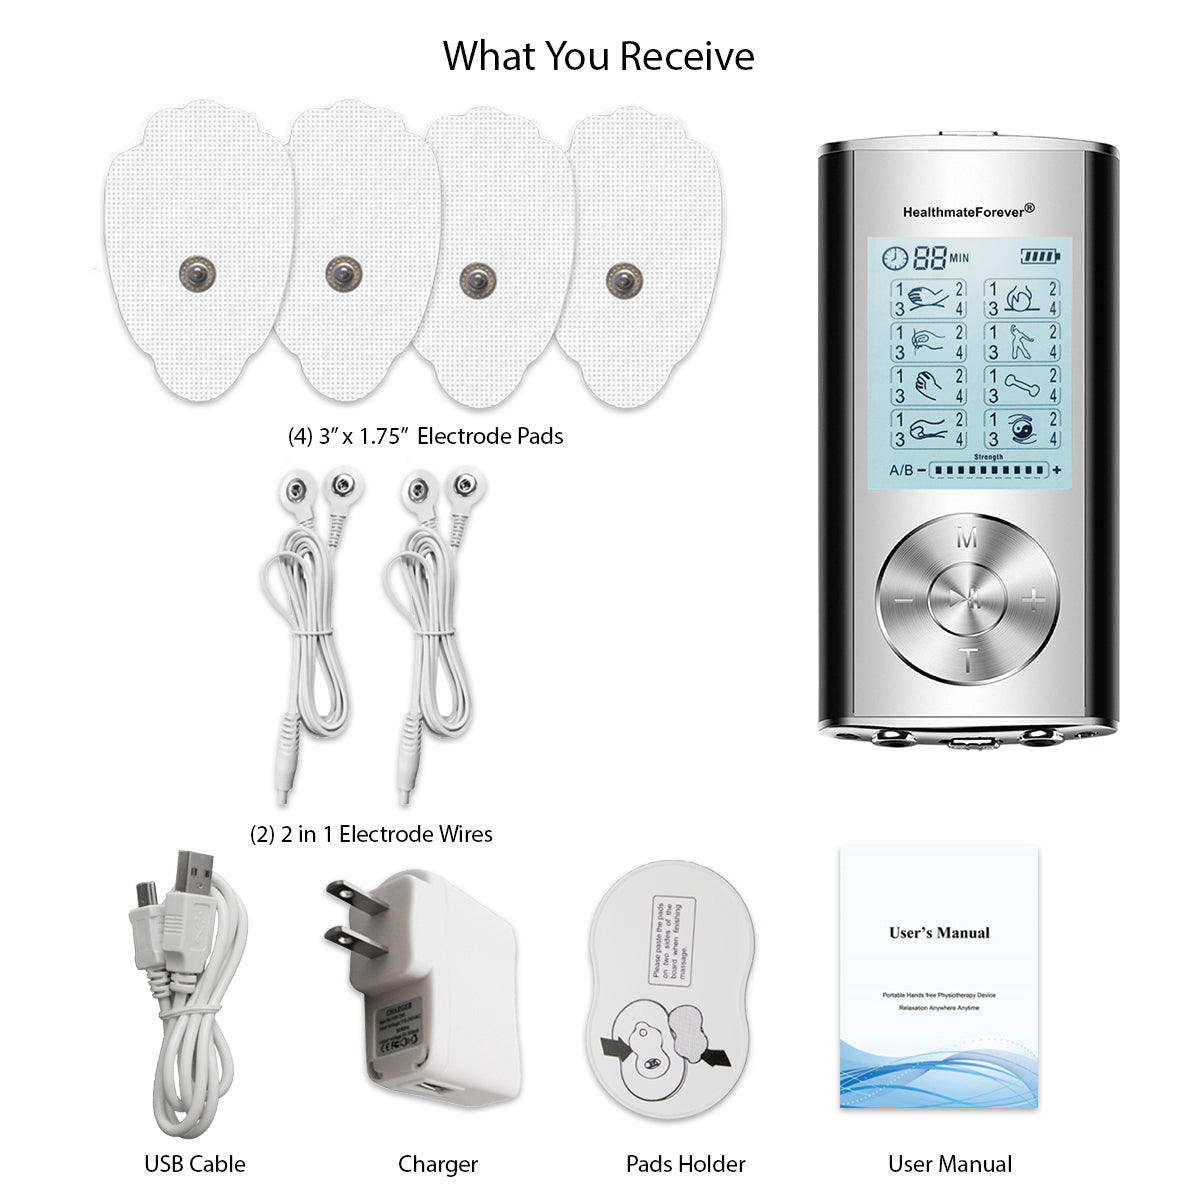 New Arrival - 2020 Version 32 Modes HM32AB TENS Unit & Muscle Stimulator - 2 Year Warranty - HealthmateForever.com